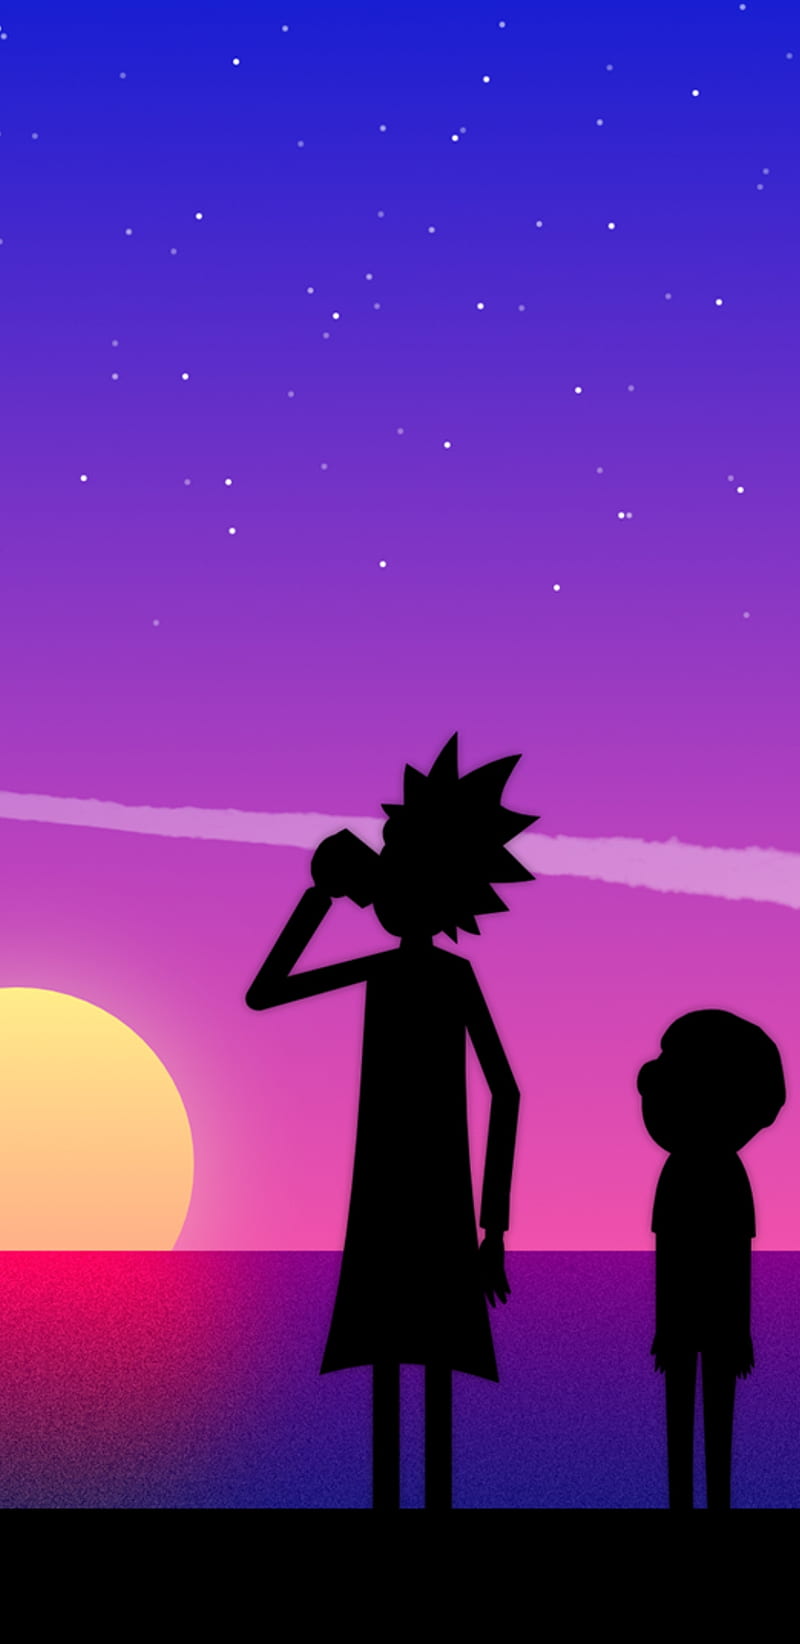 Rick and Morty and, black, blue, morty, red, rick, stars, sun, sunset, HD phone wallpaper